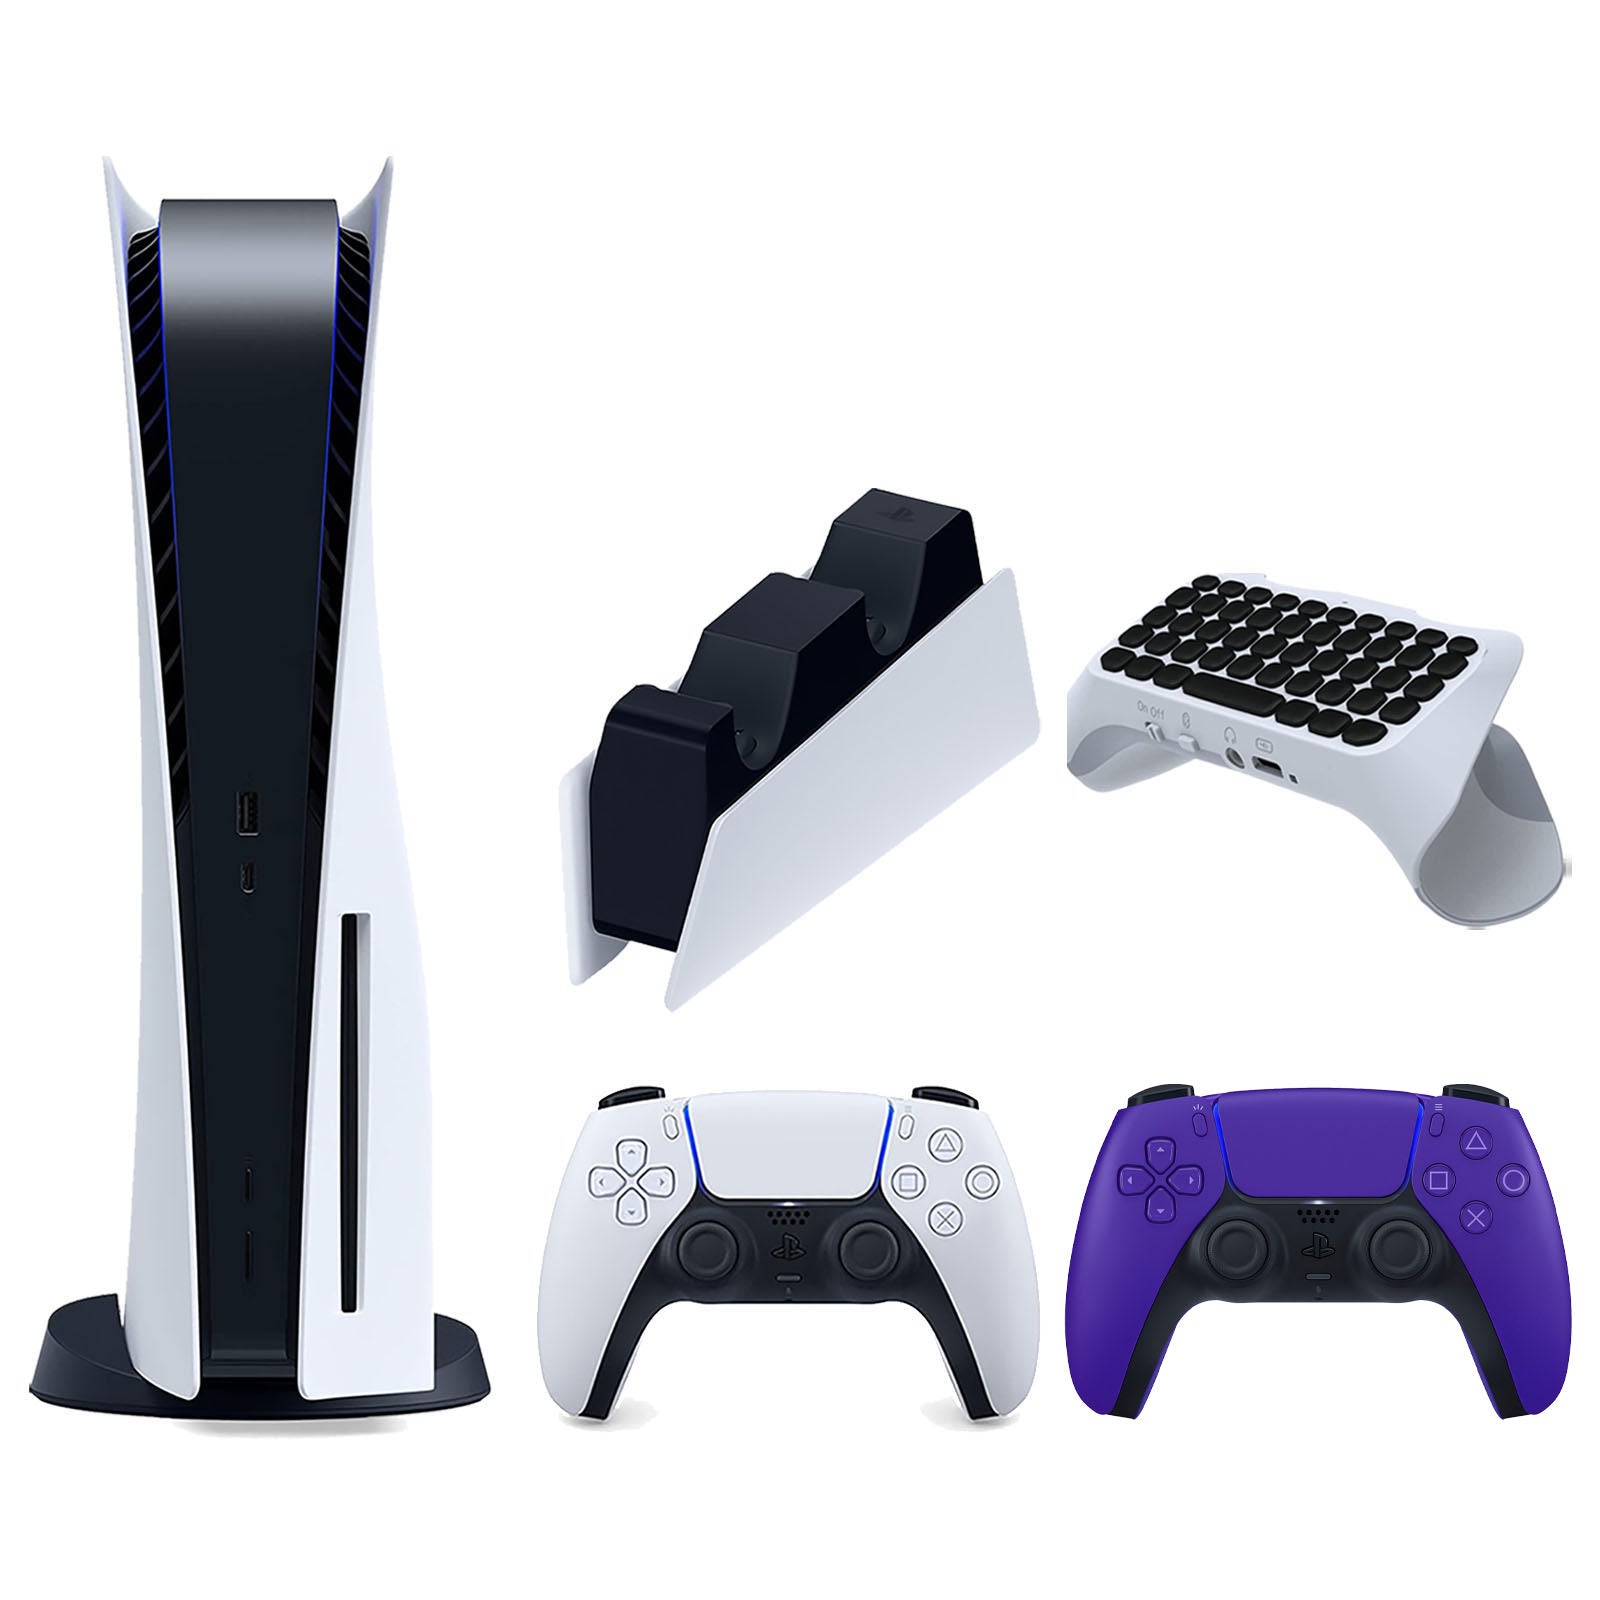 Sony Playstation 5 Disc Version Console with Extra Purple Controller, DualSense Charging Station and Surge QuickType 2.0 Wireless PS5 Controller Keypad Bundle - Pro-Distributing